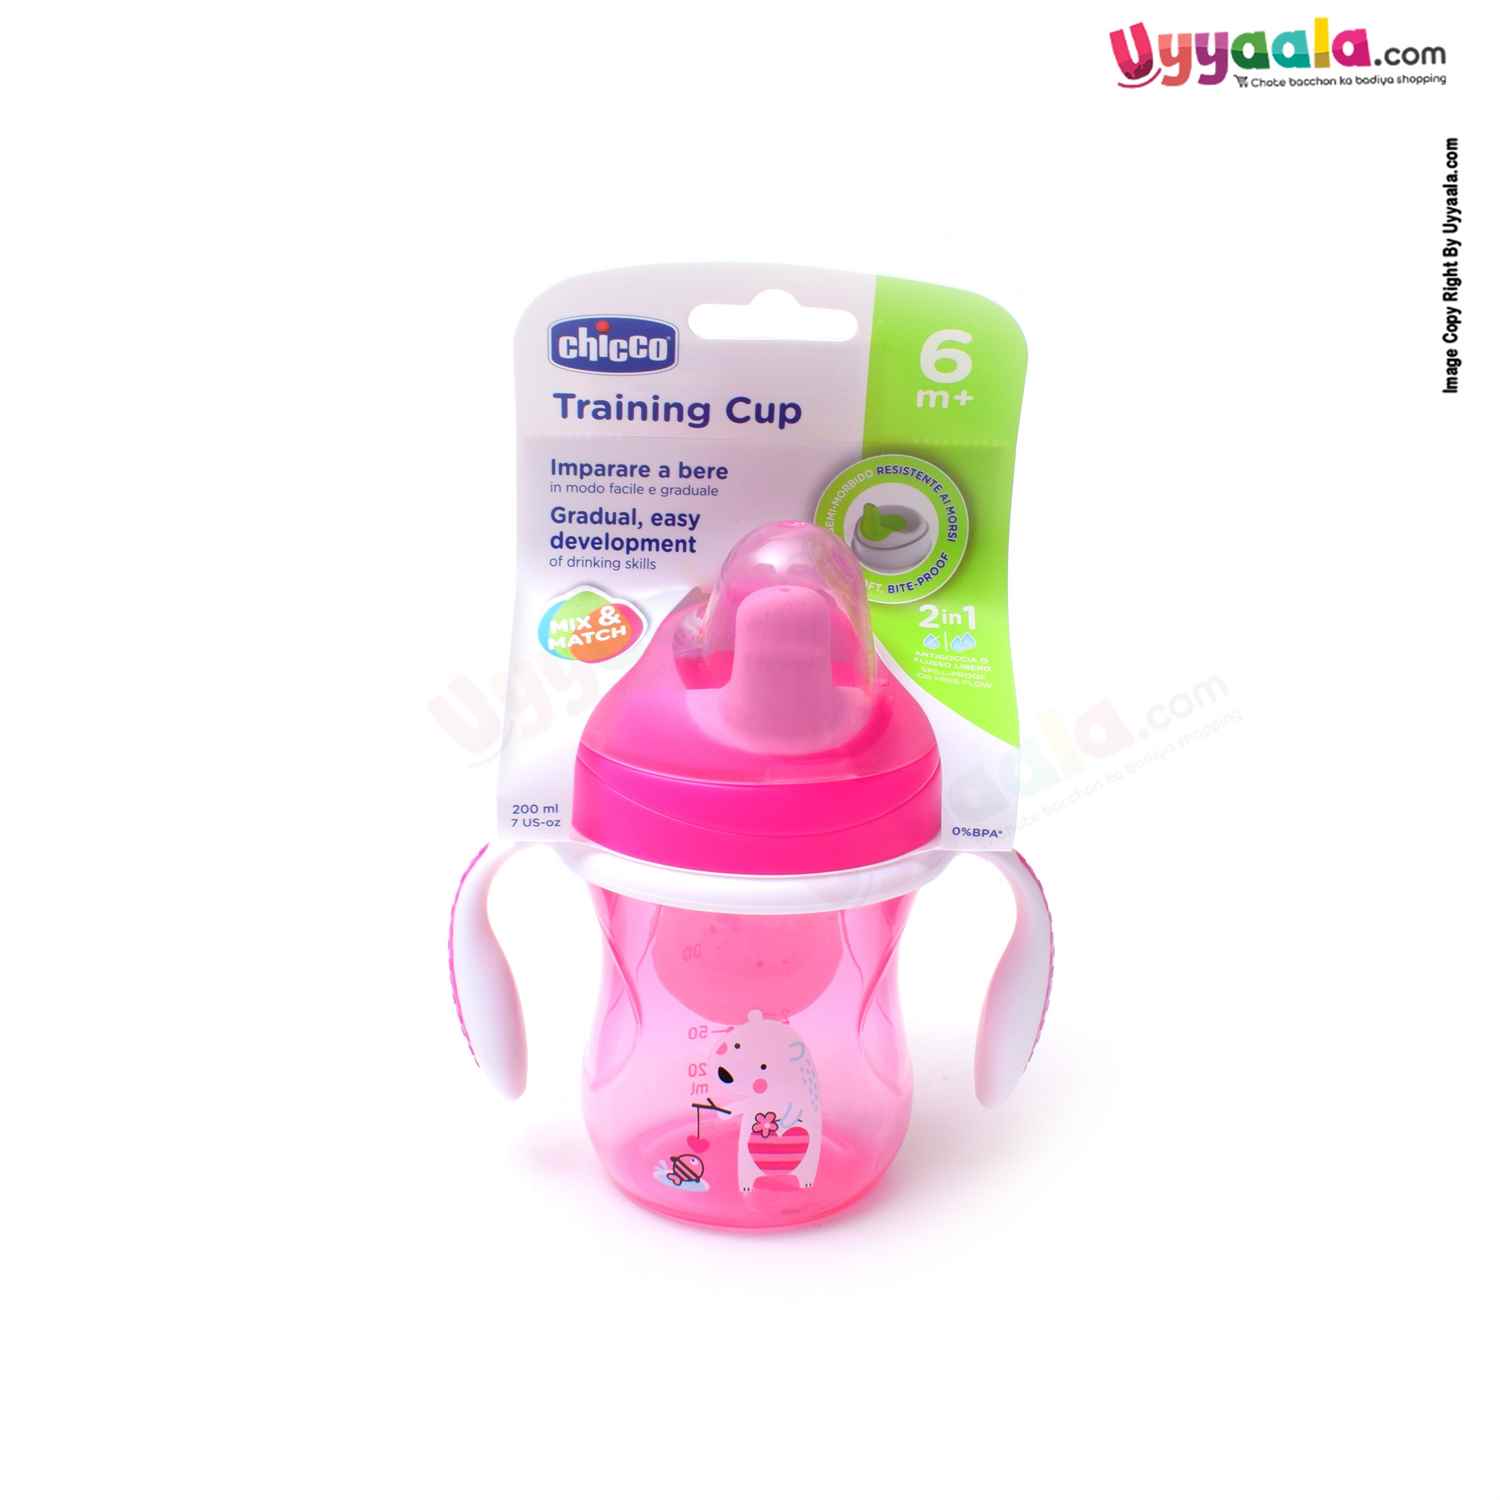 CHICCO baby 2 in 1 training sipper cup - 200ml, 6+m